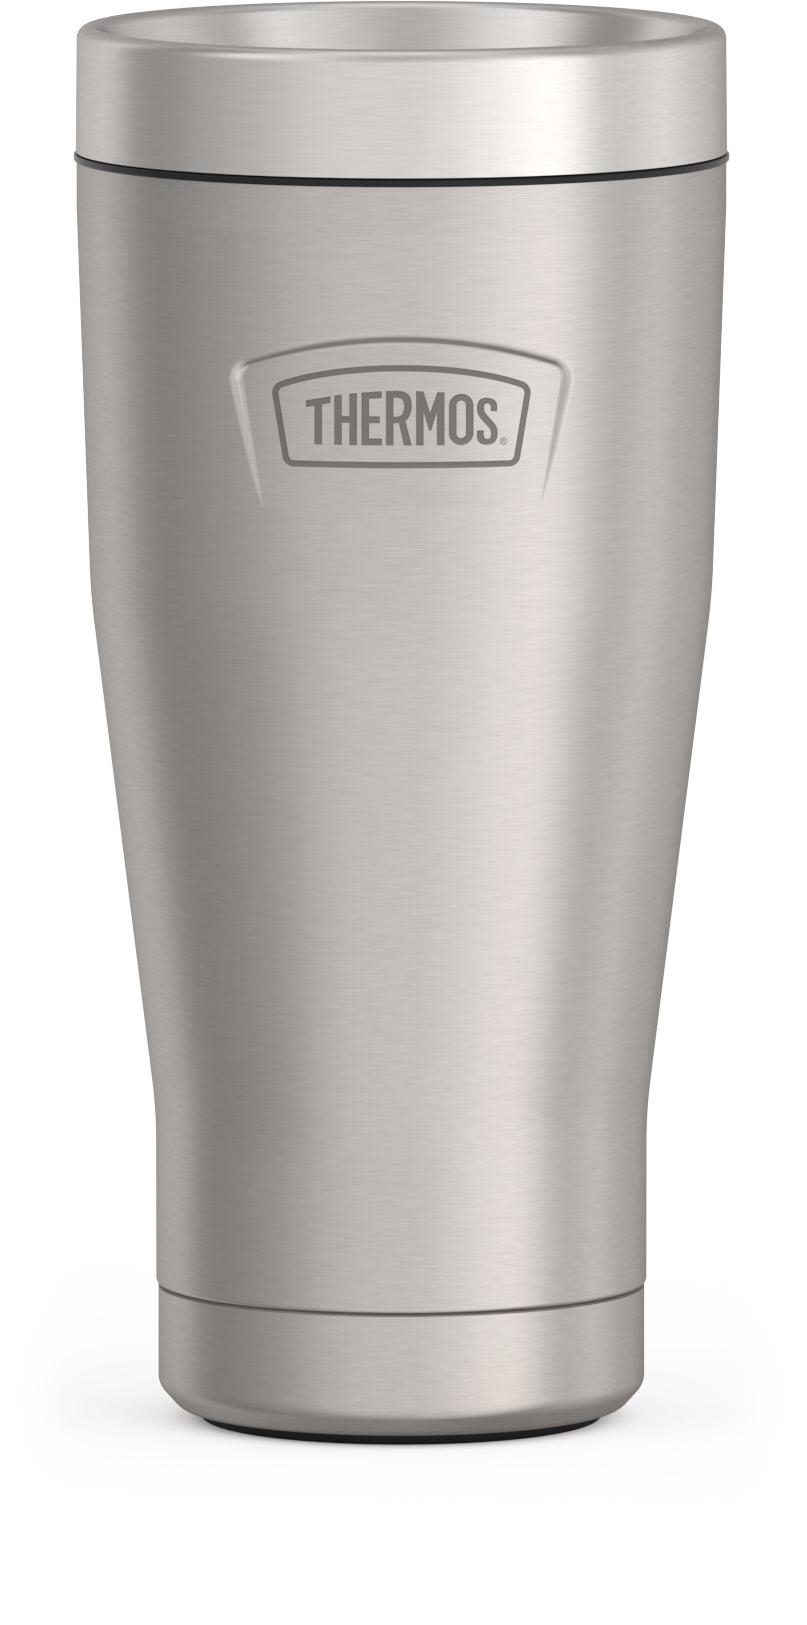 Thermos Tumbler, Travel, Stainless Steel, 16 Ounce, Shop